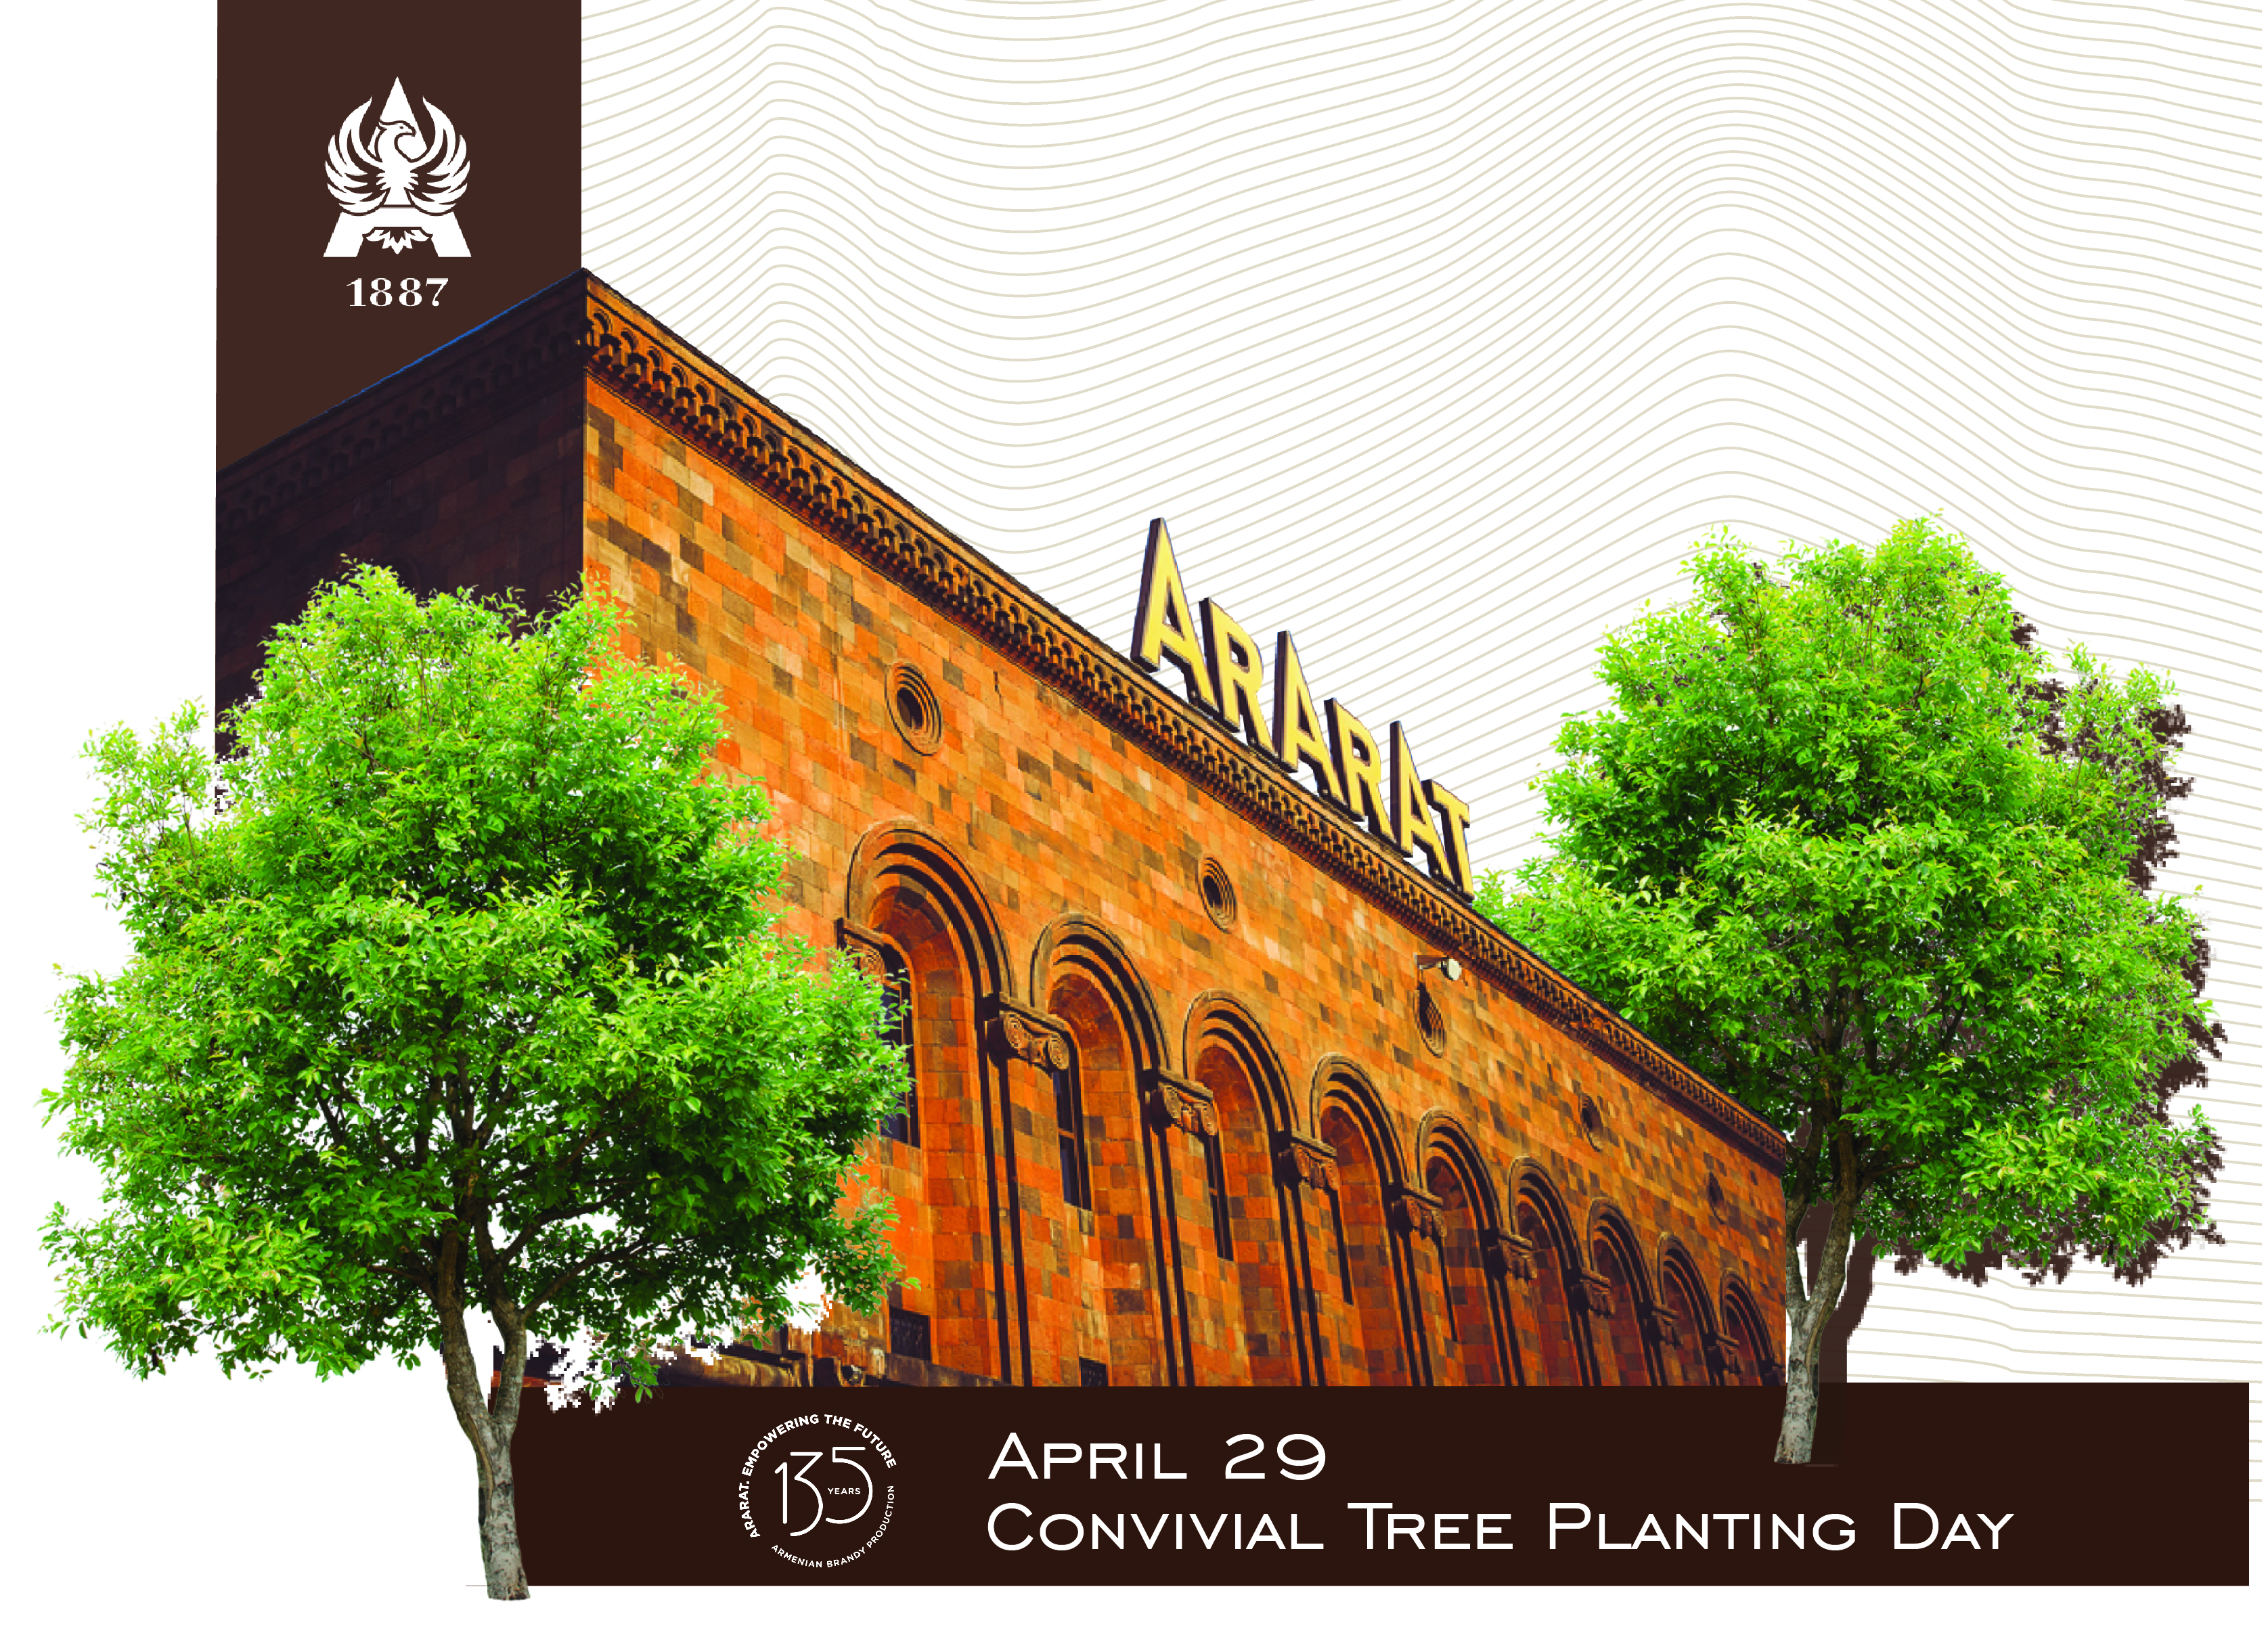 Yerevan Brandy Company Initiated Tree Planting Project in the Frames of the 135th Anniversary of the brandy making